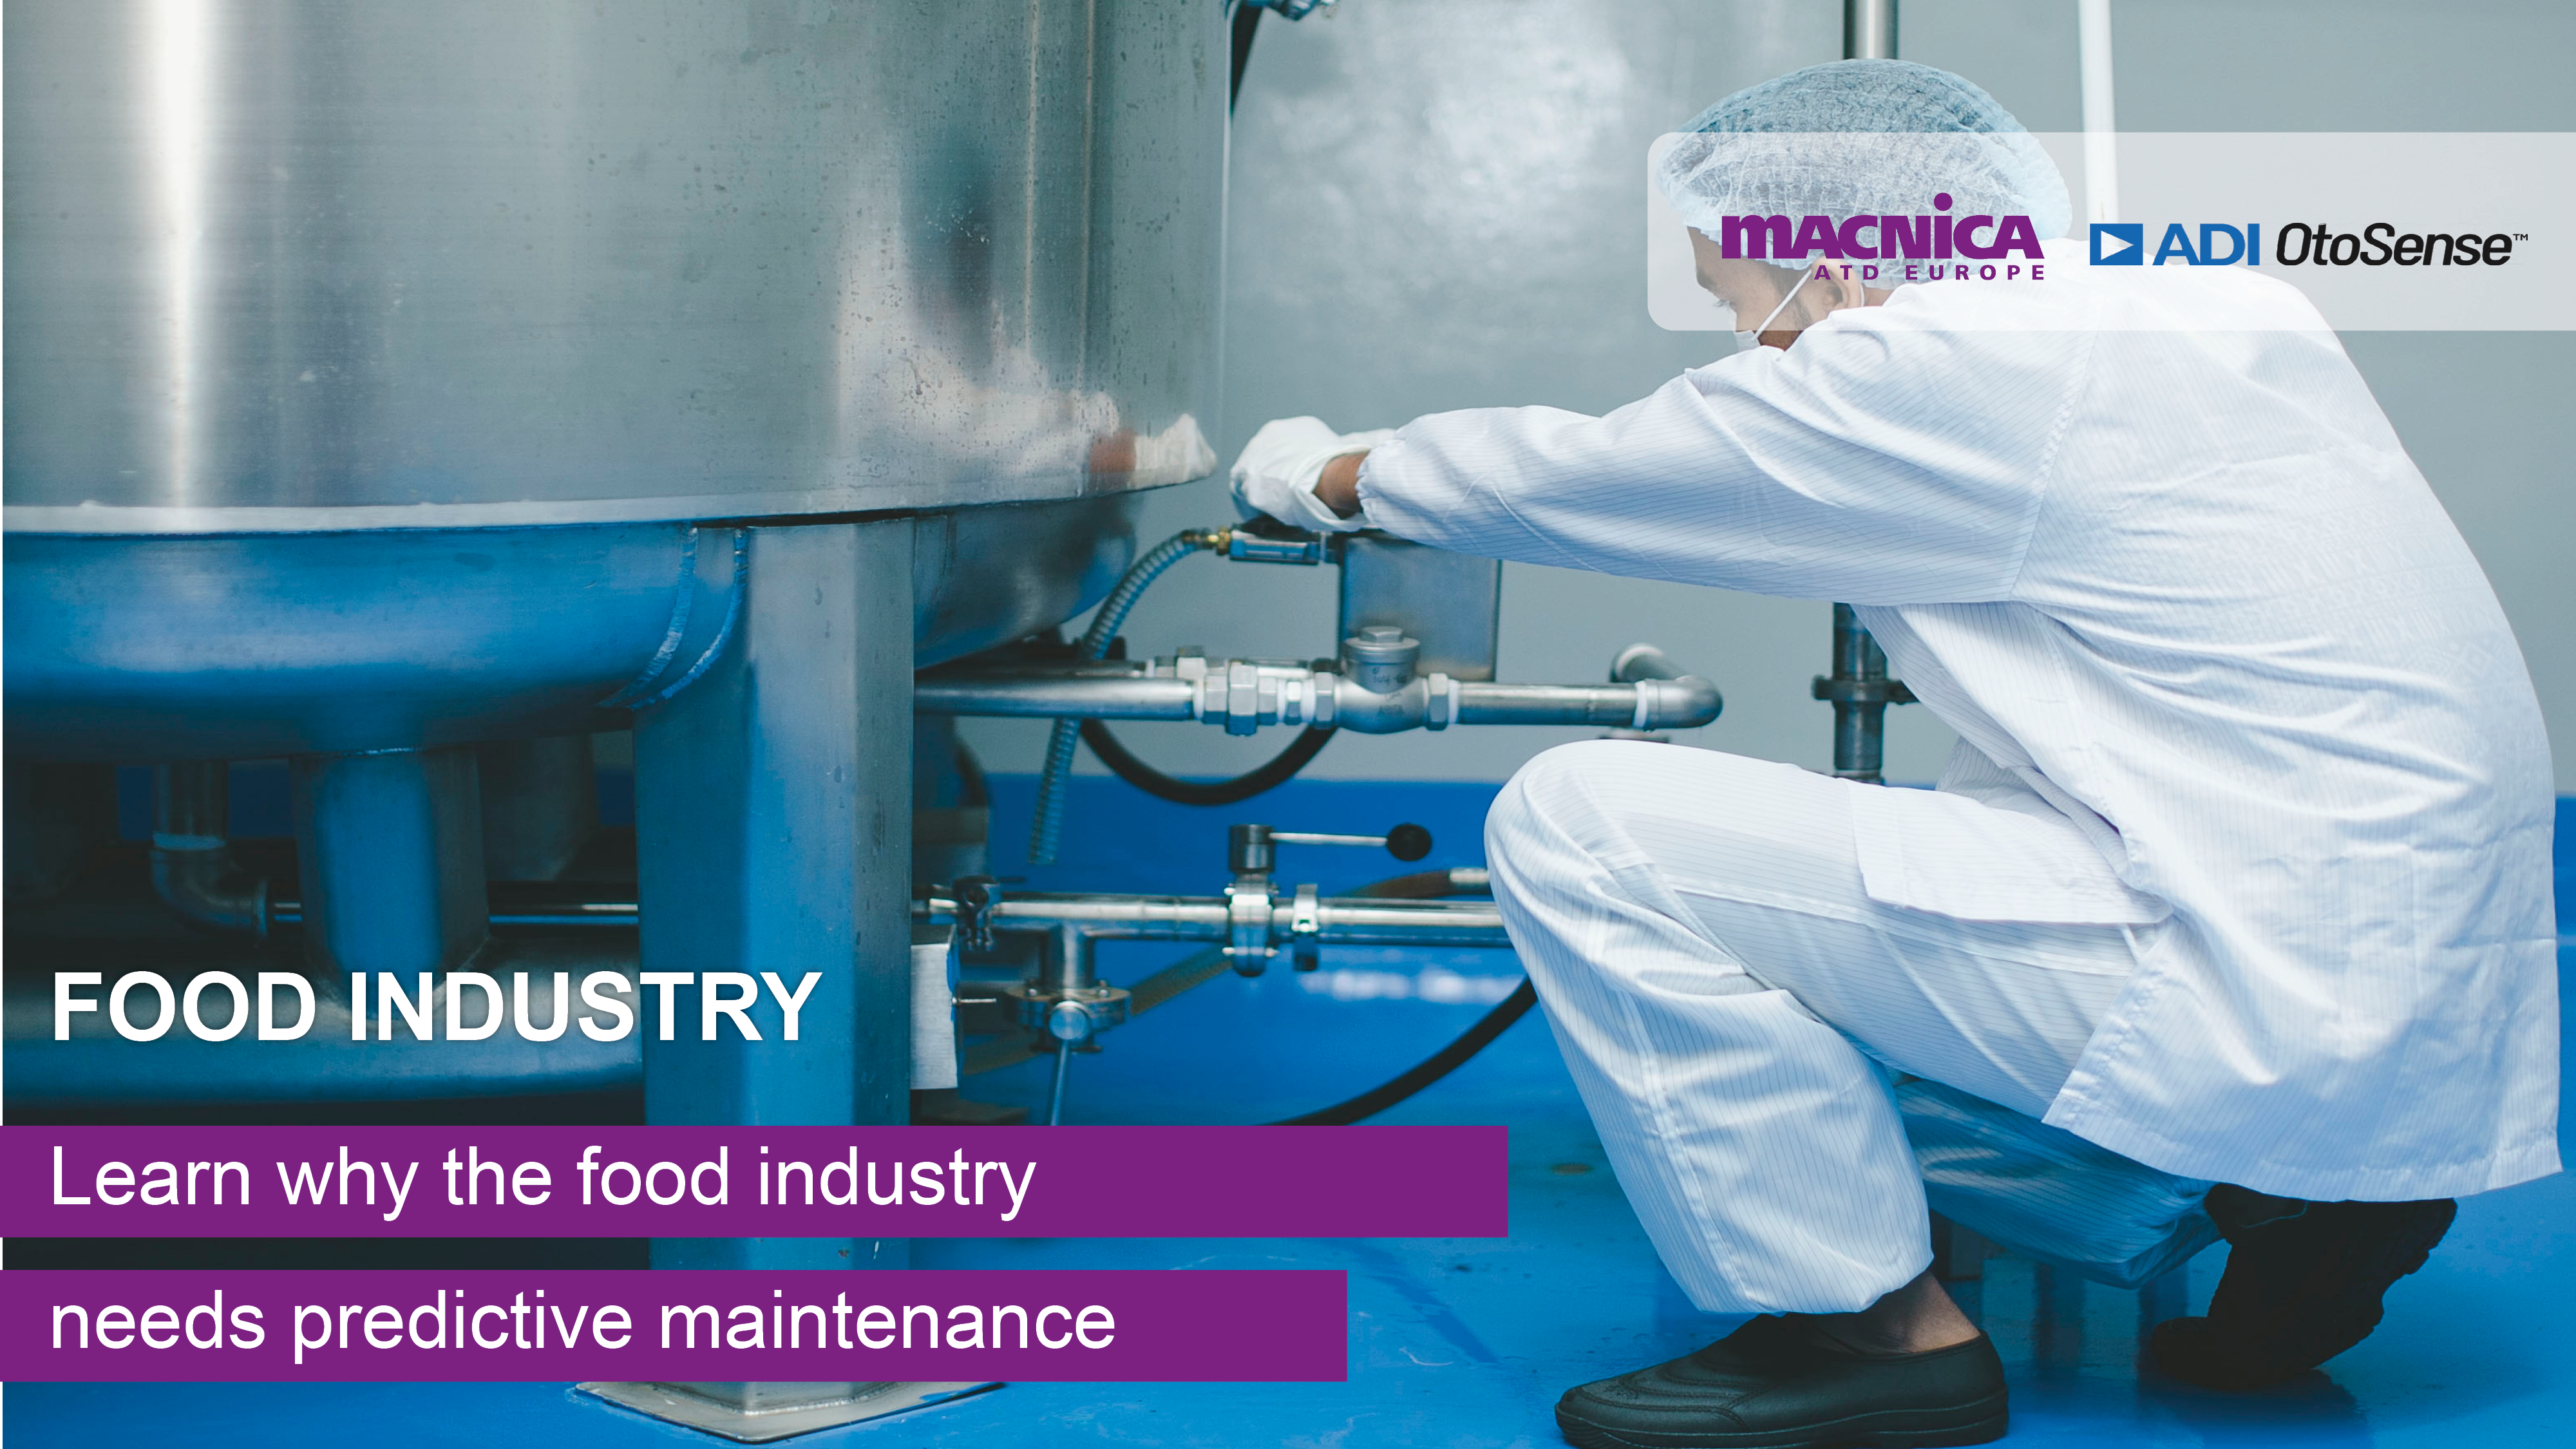 24042023_ADI - Impacts of the OtoSense solution in the food industry - linkedin